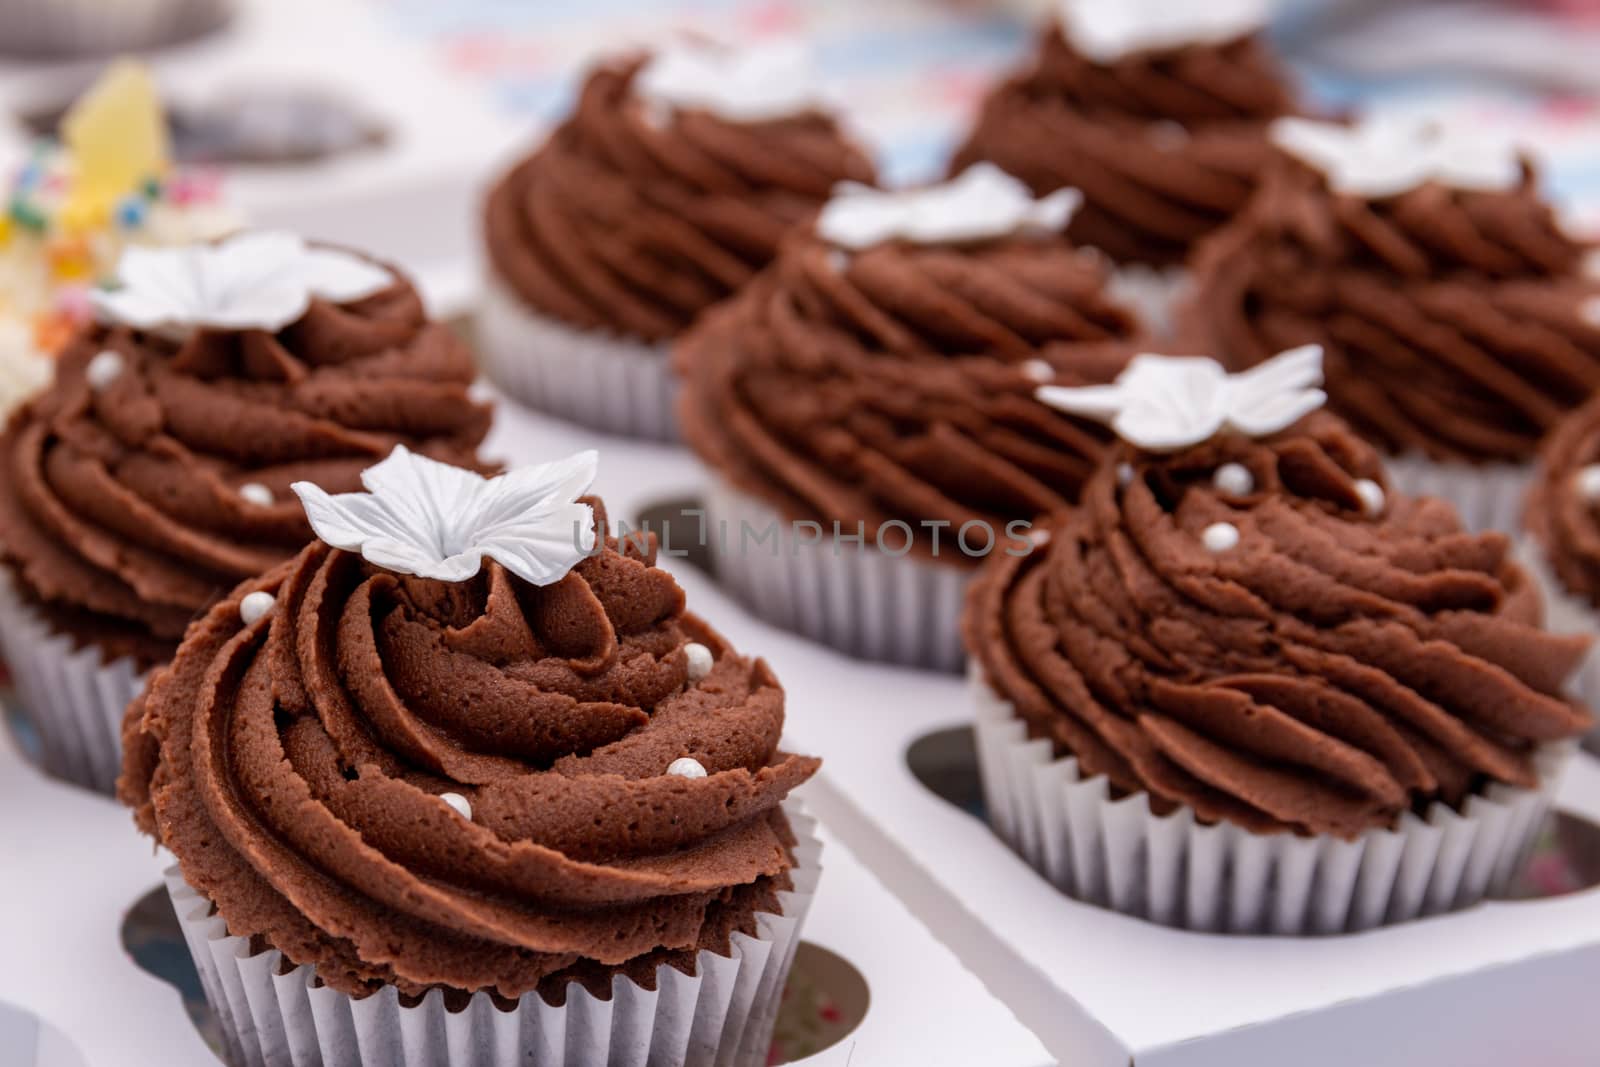 Chocolate cupcakes by magicbones